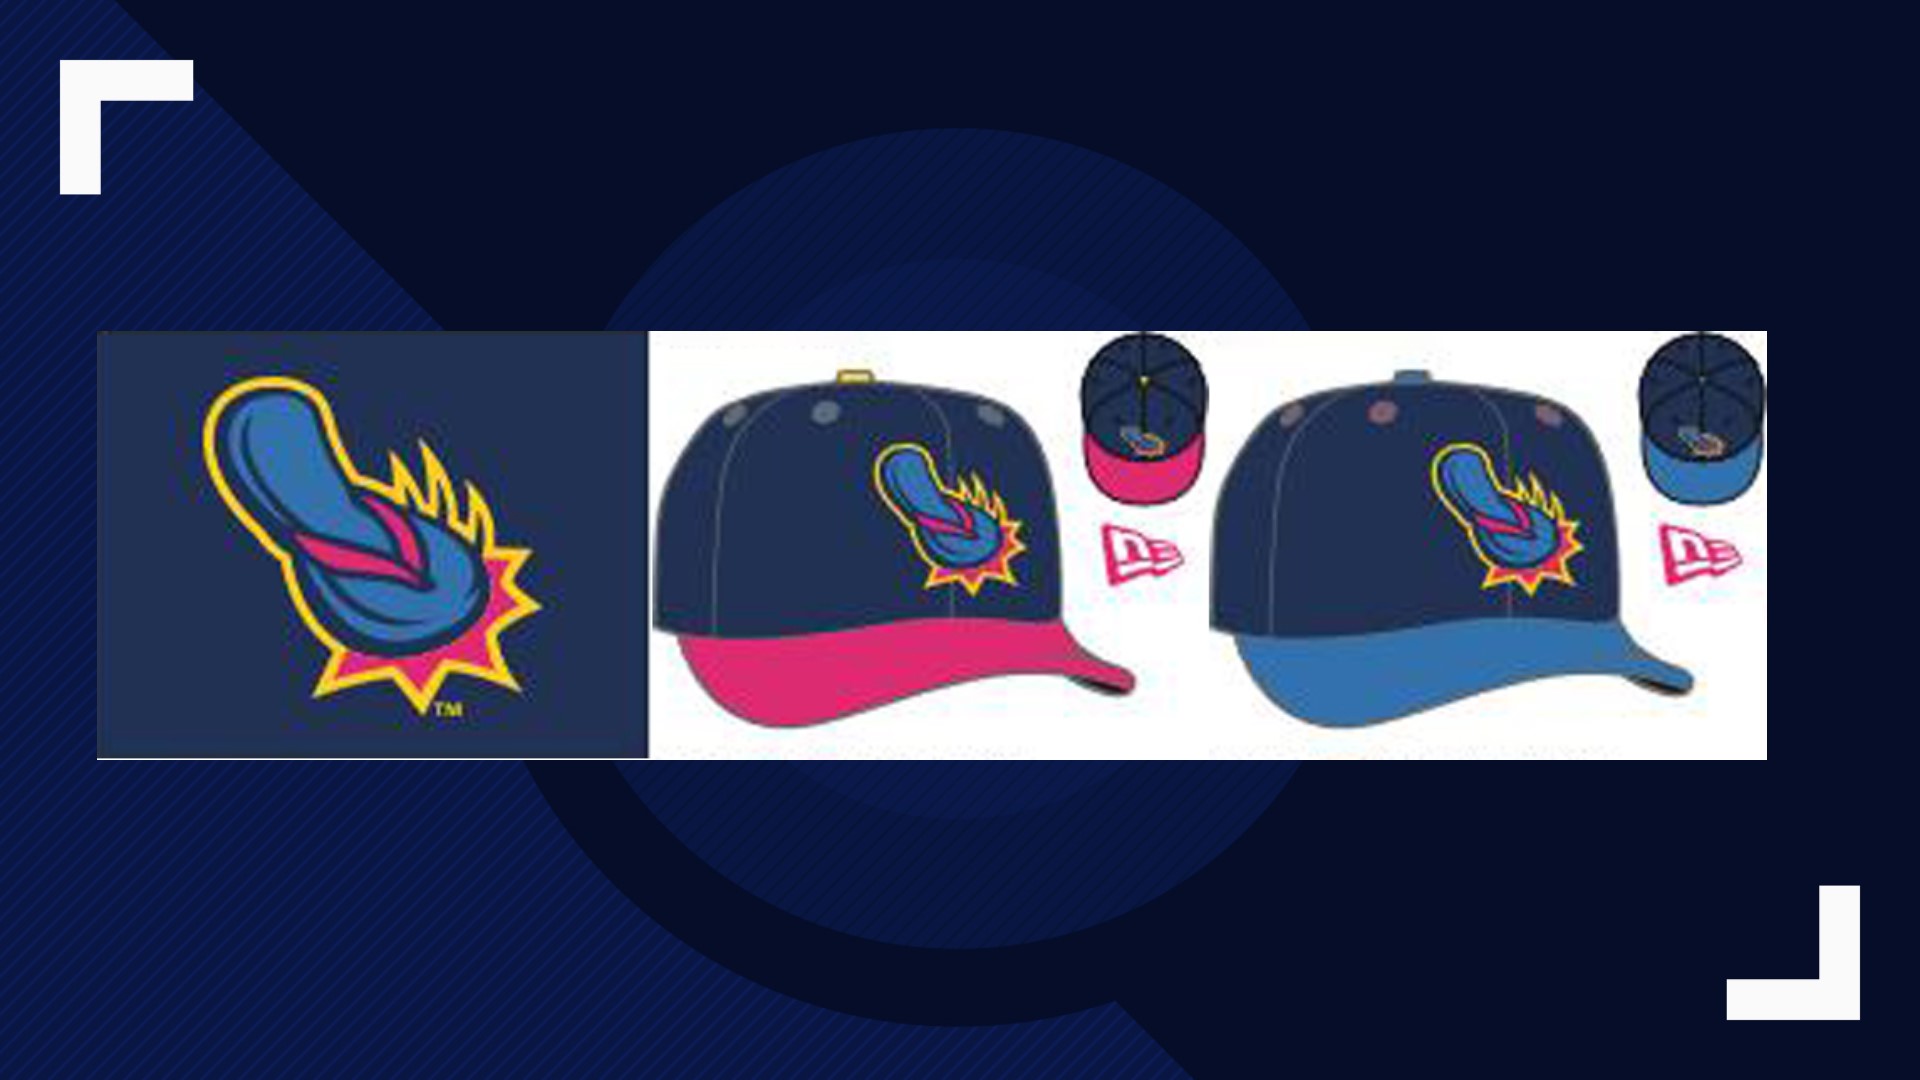 Missions unveil new 'Flying Chanclas' logo for 2019 season